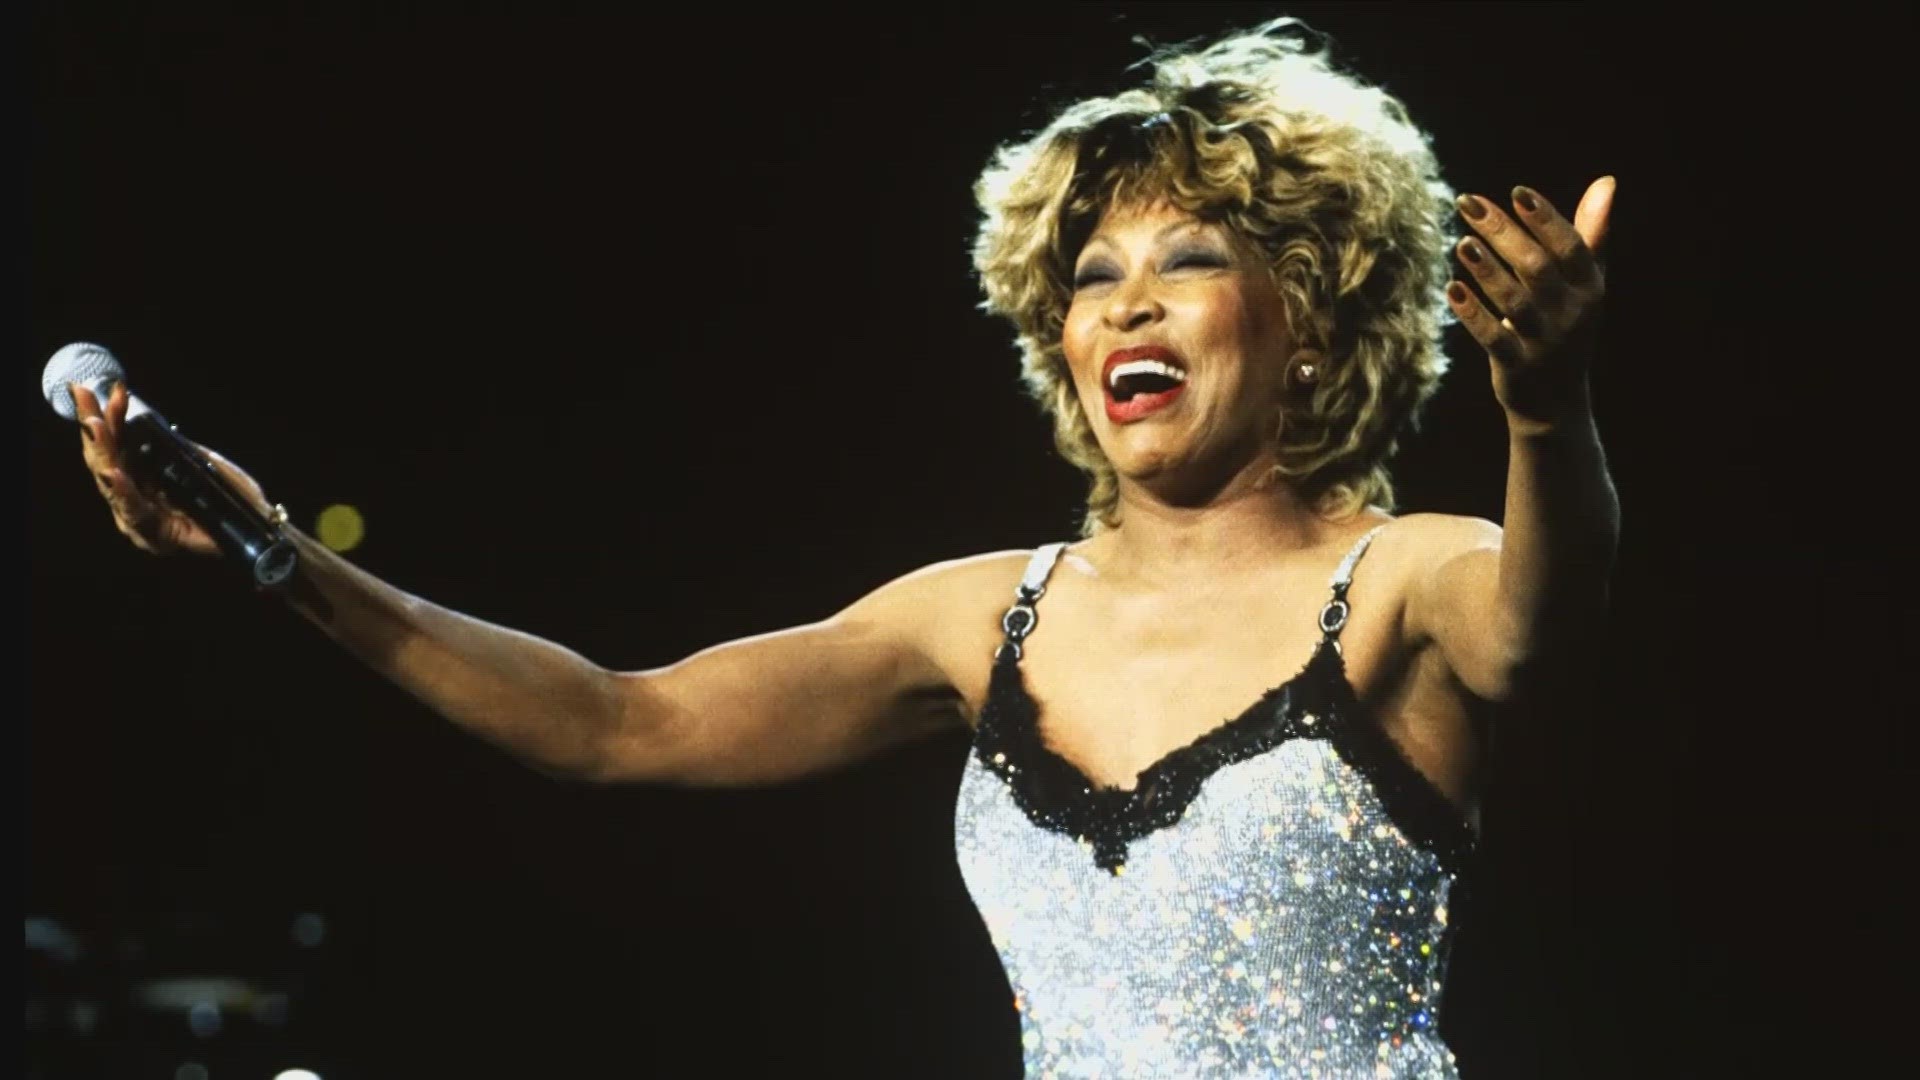 The unstoppable singer and stage performer Tina Turner has died at 83.